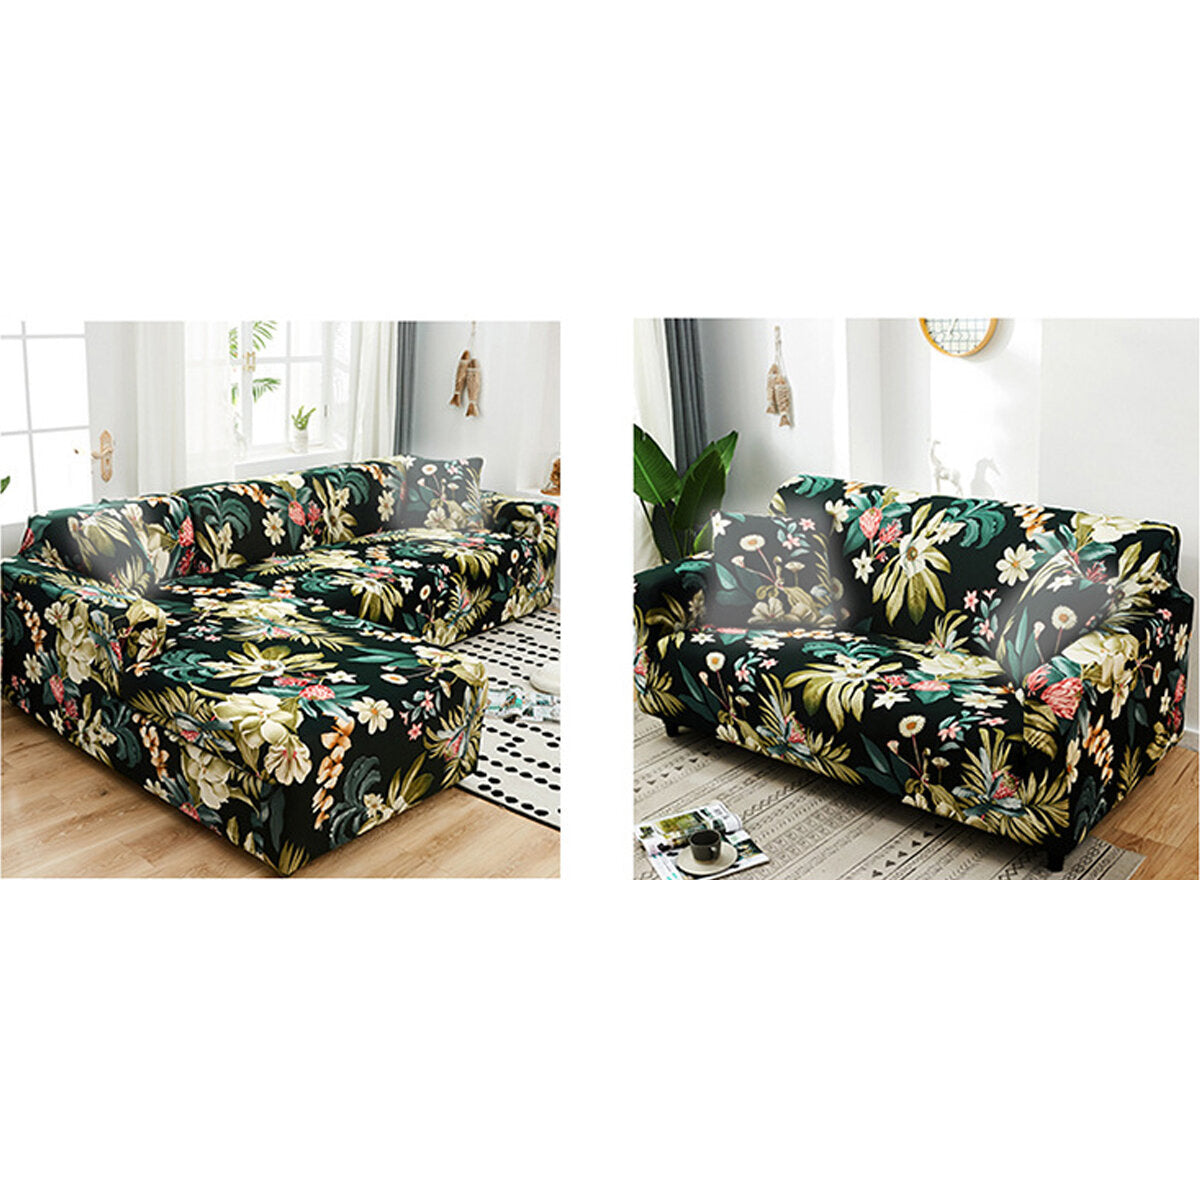 1/2/3 Sofa Cover Universal Chair Seat Protector Stretch Slipcover Couch Case Home Office Furniture Decoration